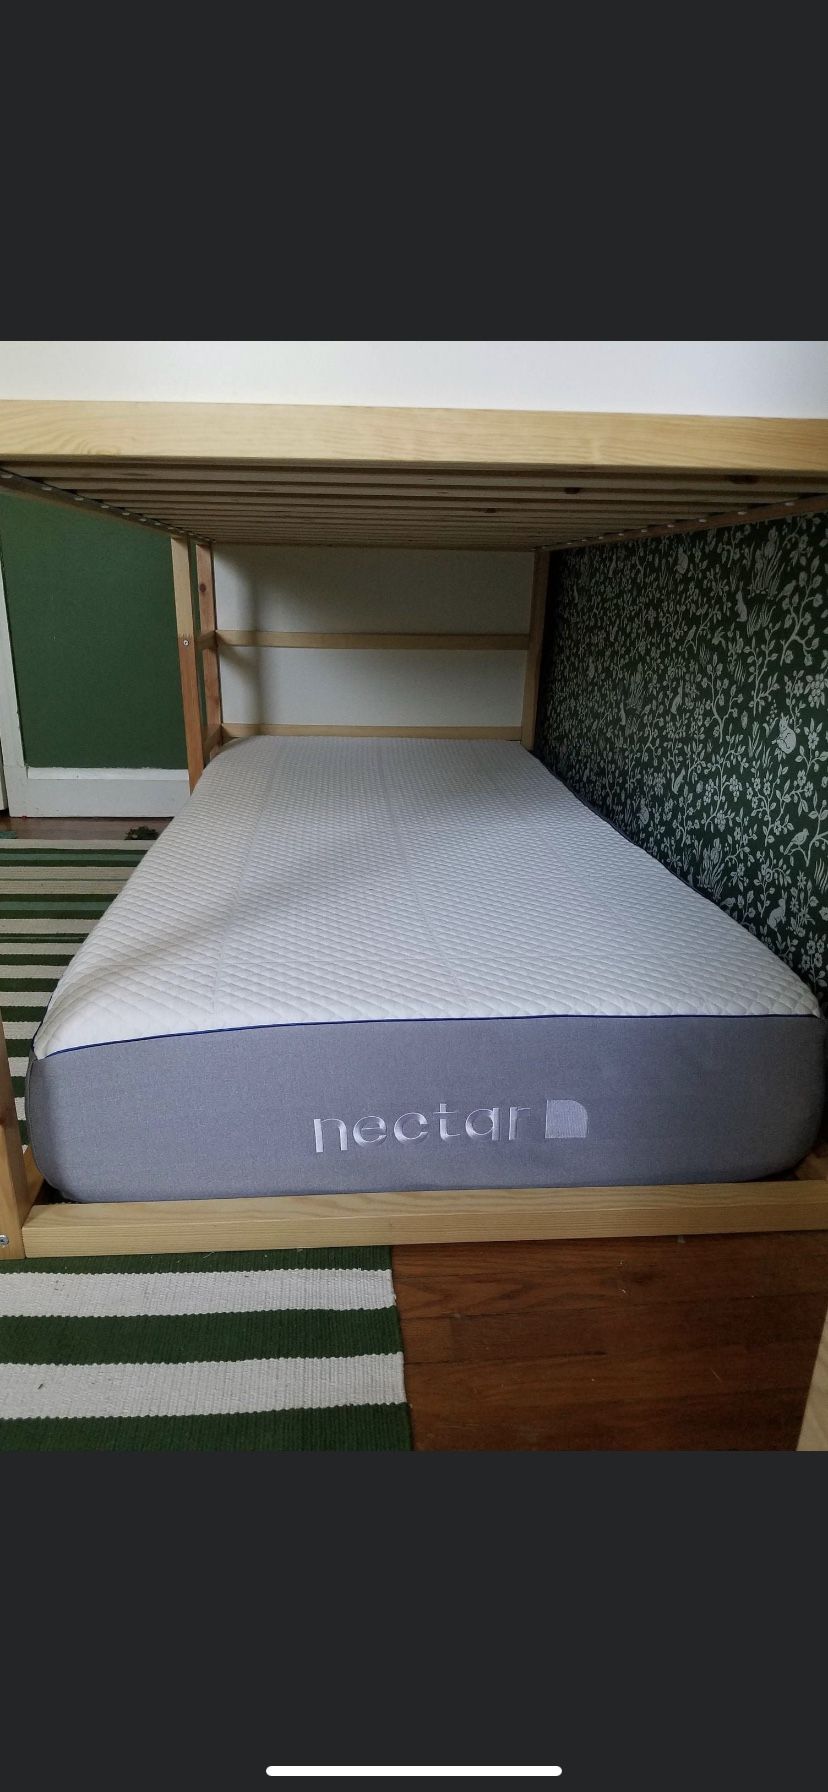 Nectar Twin XL Mattress Like New Used In Camper About 5 Times 